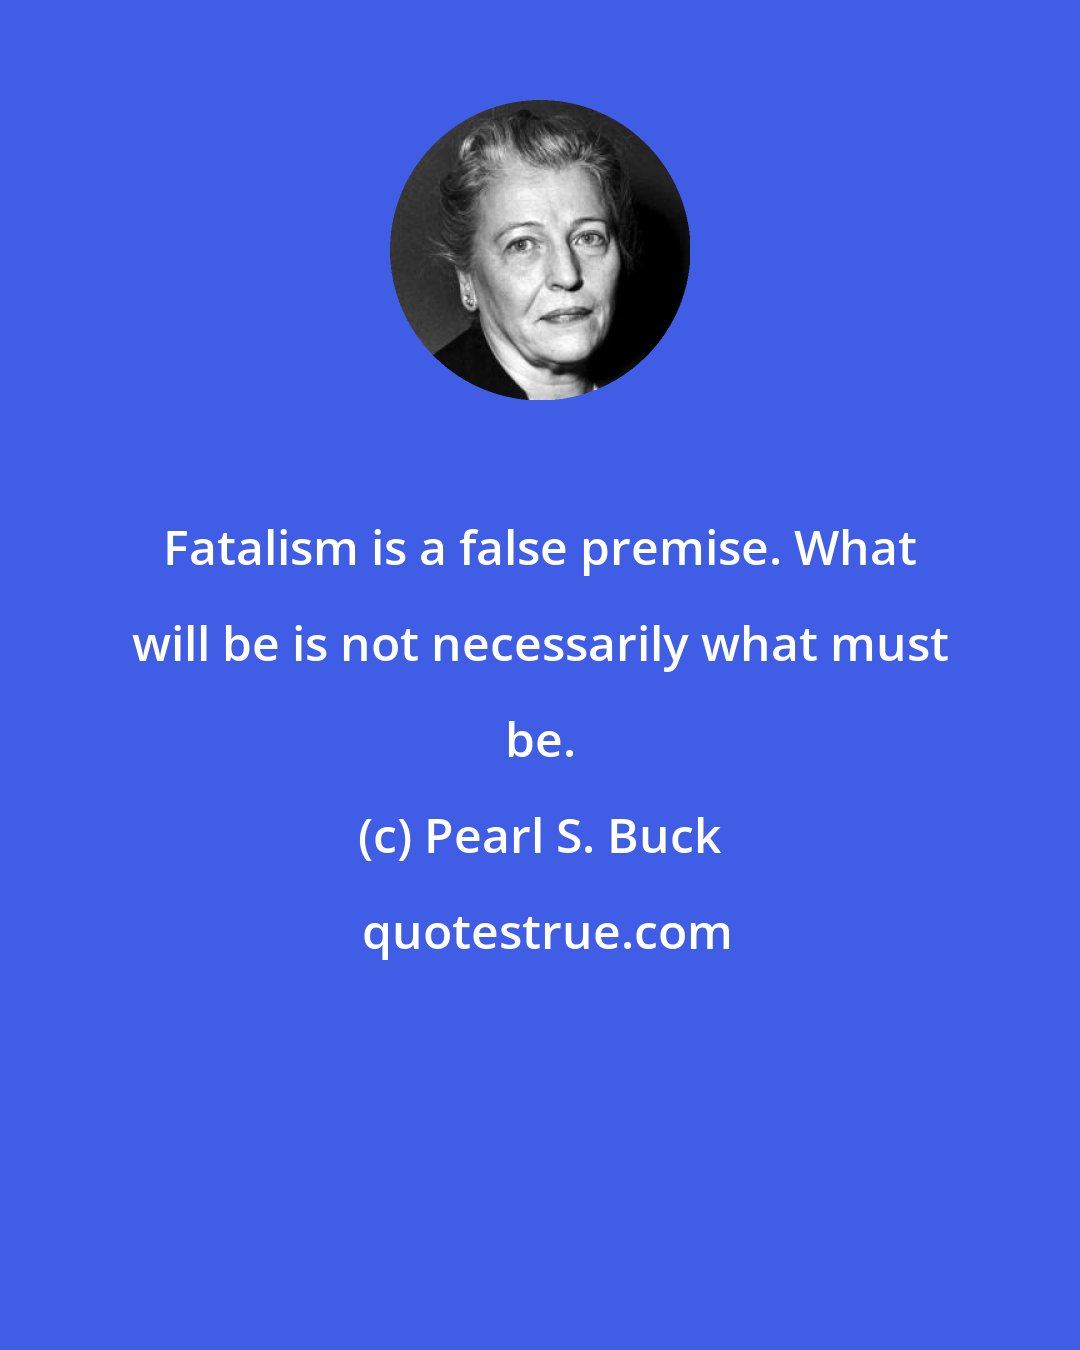 Pearl S. Buck: Fatalism is a false premise. What will be is not necessarily what must be.